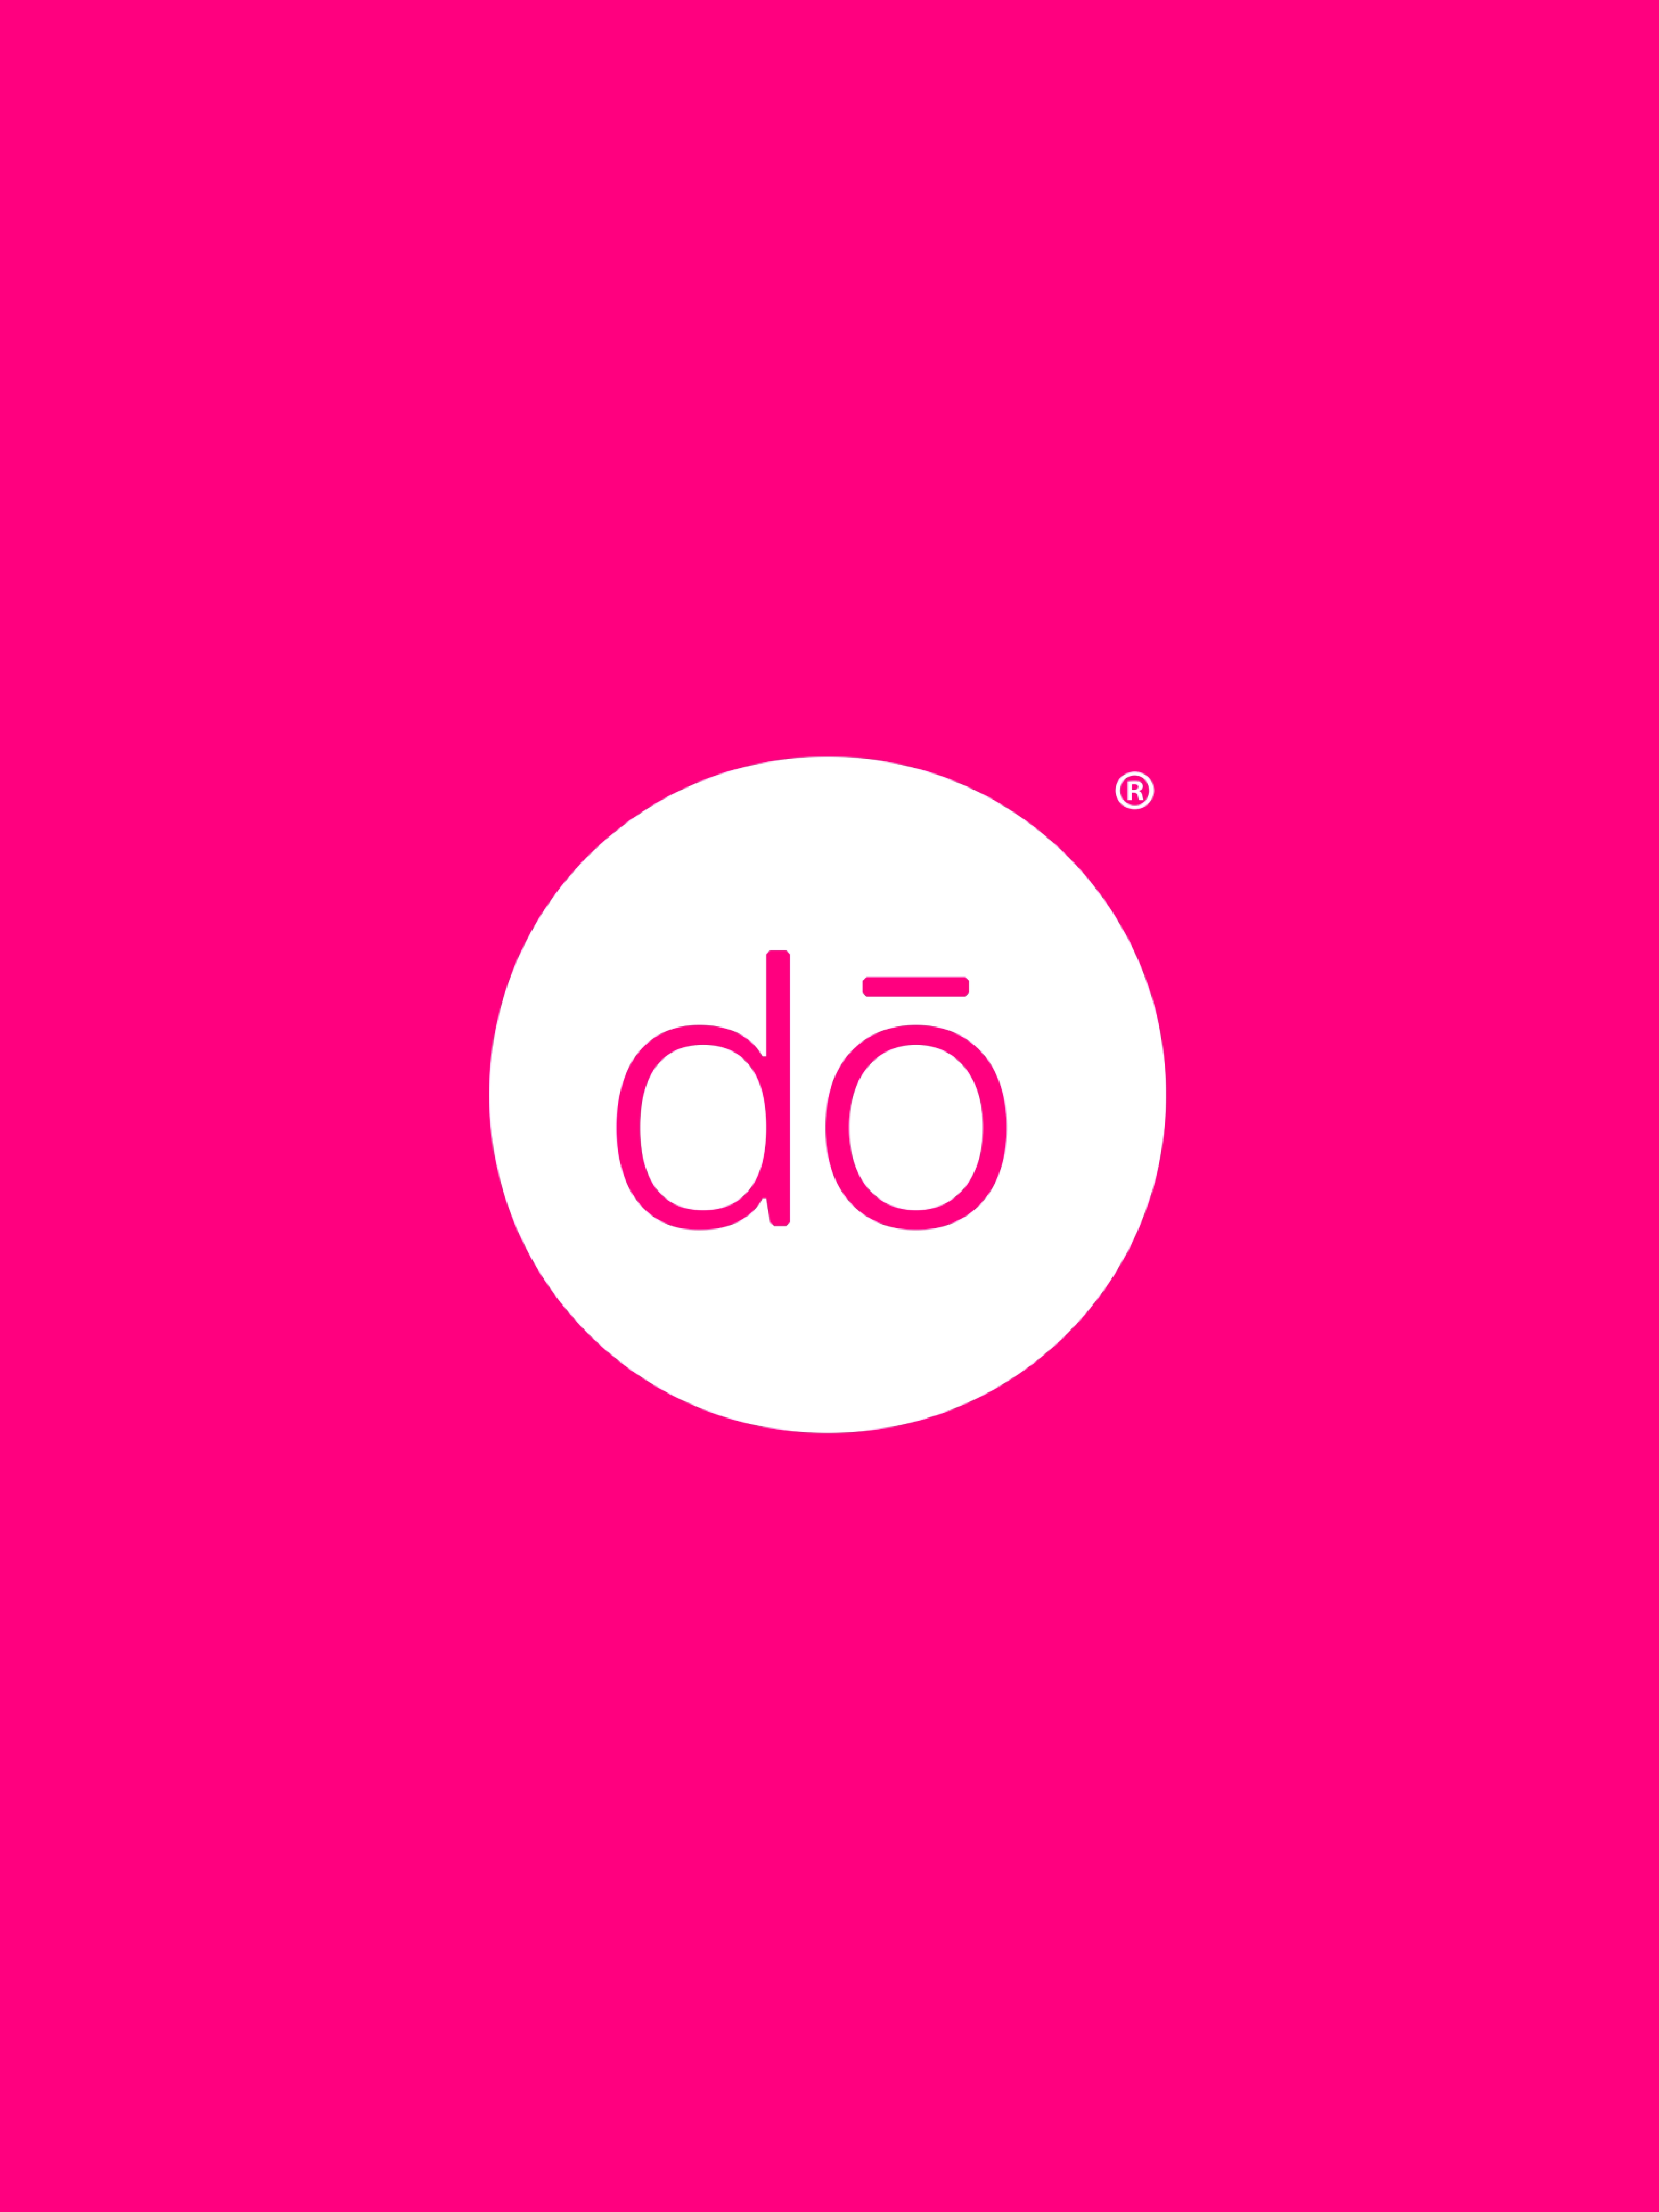 Starting a brand from scratch with DŌ